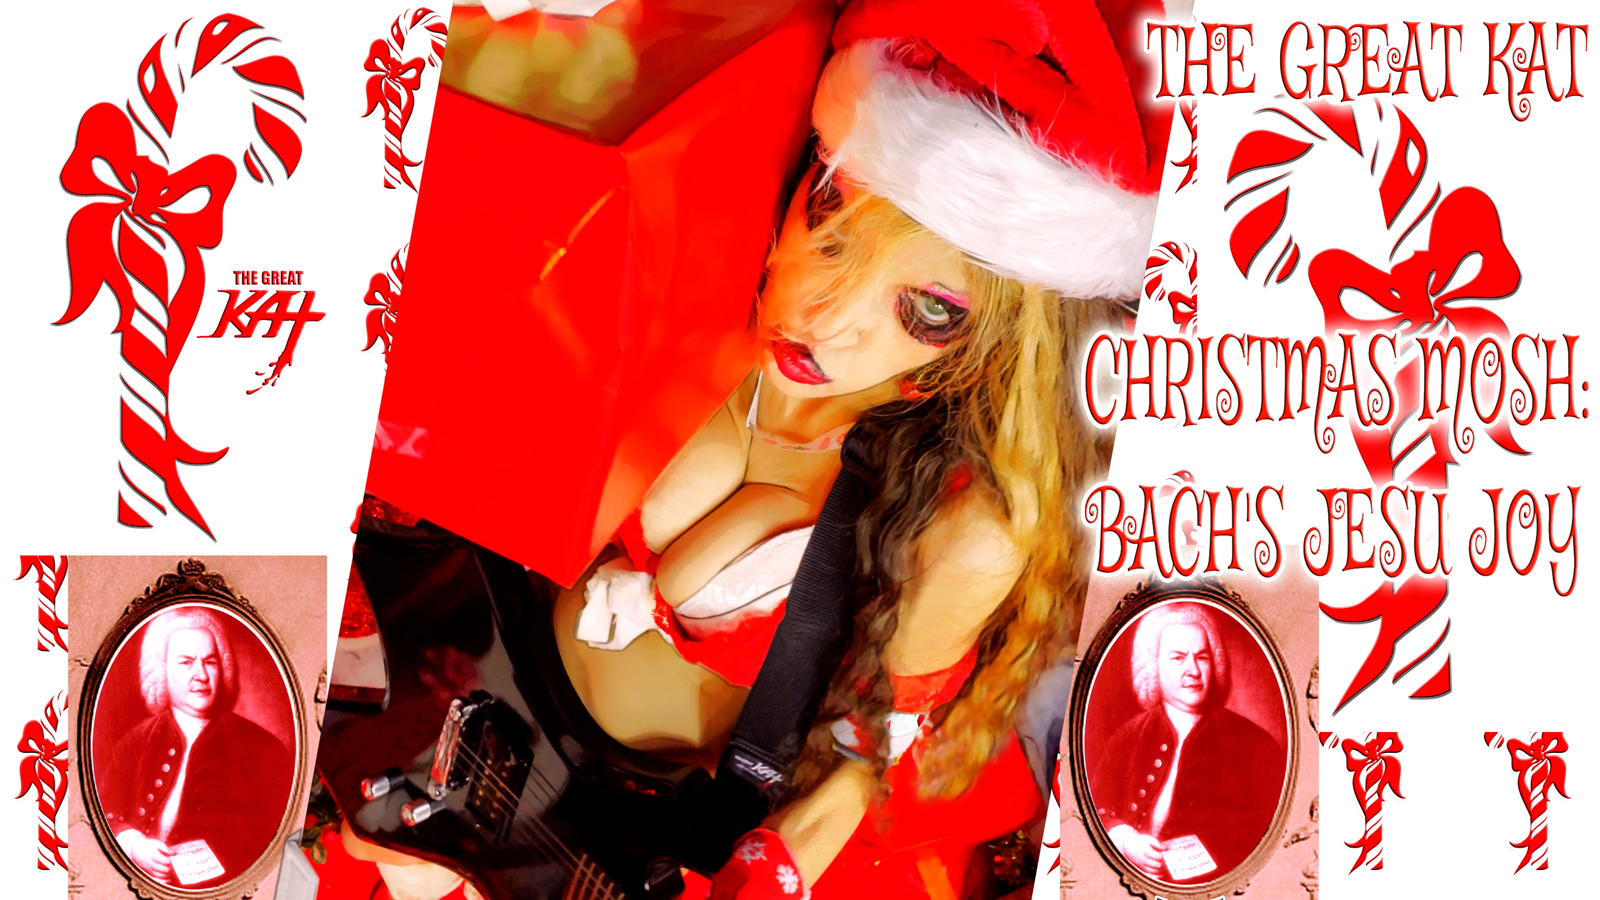 NEW! "BACHS JESU JOY: YULE LOG FIREPLACE VIOLIN" MUSIC VIDEO by THE GREAT KAT GUITAR GODDESS! CHRISTMAS COMES EARLY WITH BACH & THE GREAT KAT! The Great Kat Guitar Goddess celebrates Christmas early with Johann Sebastian Bachs Baroque holiday classic "Jesu Joy". Bachs famous masterpiece is known by the title "Jesu, Joy of Man's Desiring", but Goddess Great Kat is now desiring to bring it to the whole world with this new metal mosh treatment! The Great Kat virtuosically shreds 4 lead guitars with beautiful melodic contrapuntal melodies and harmonies, along with Cathedral Organ accompaniment, while The Great Kat's heavy metal rhythm guitars, bass and drums pound with headbanging and moshing rhythms.